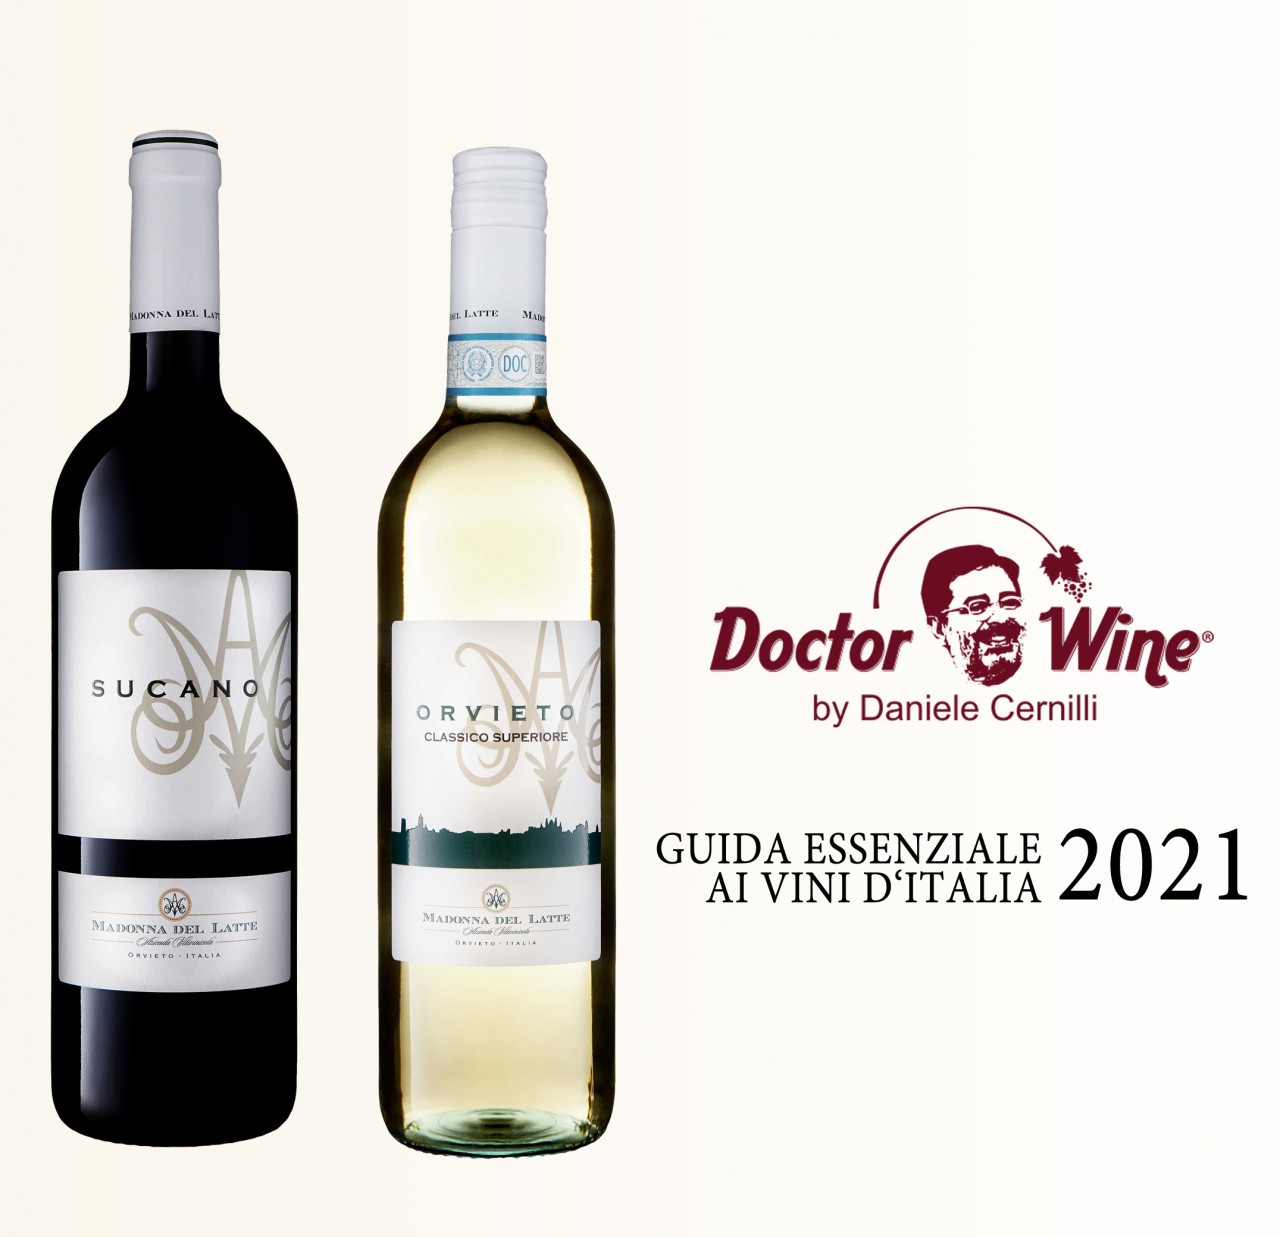 The Essential Guide to Italian Wines 2021